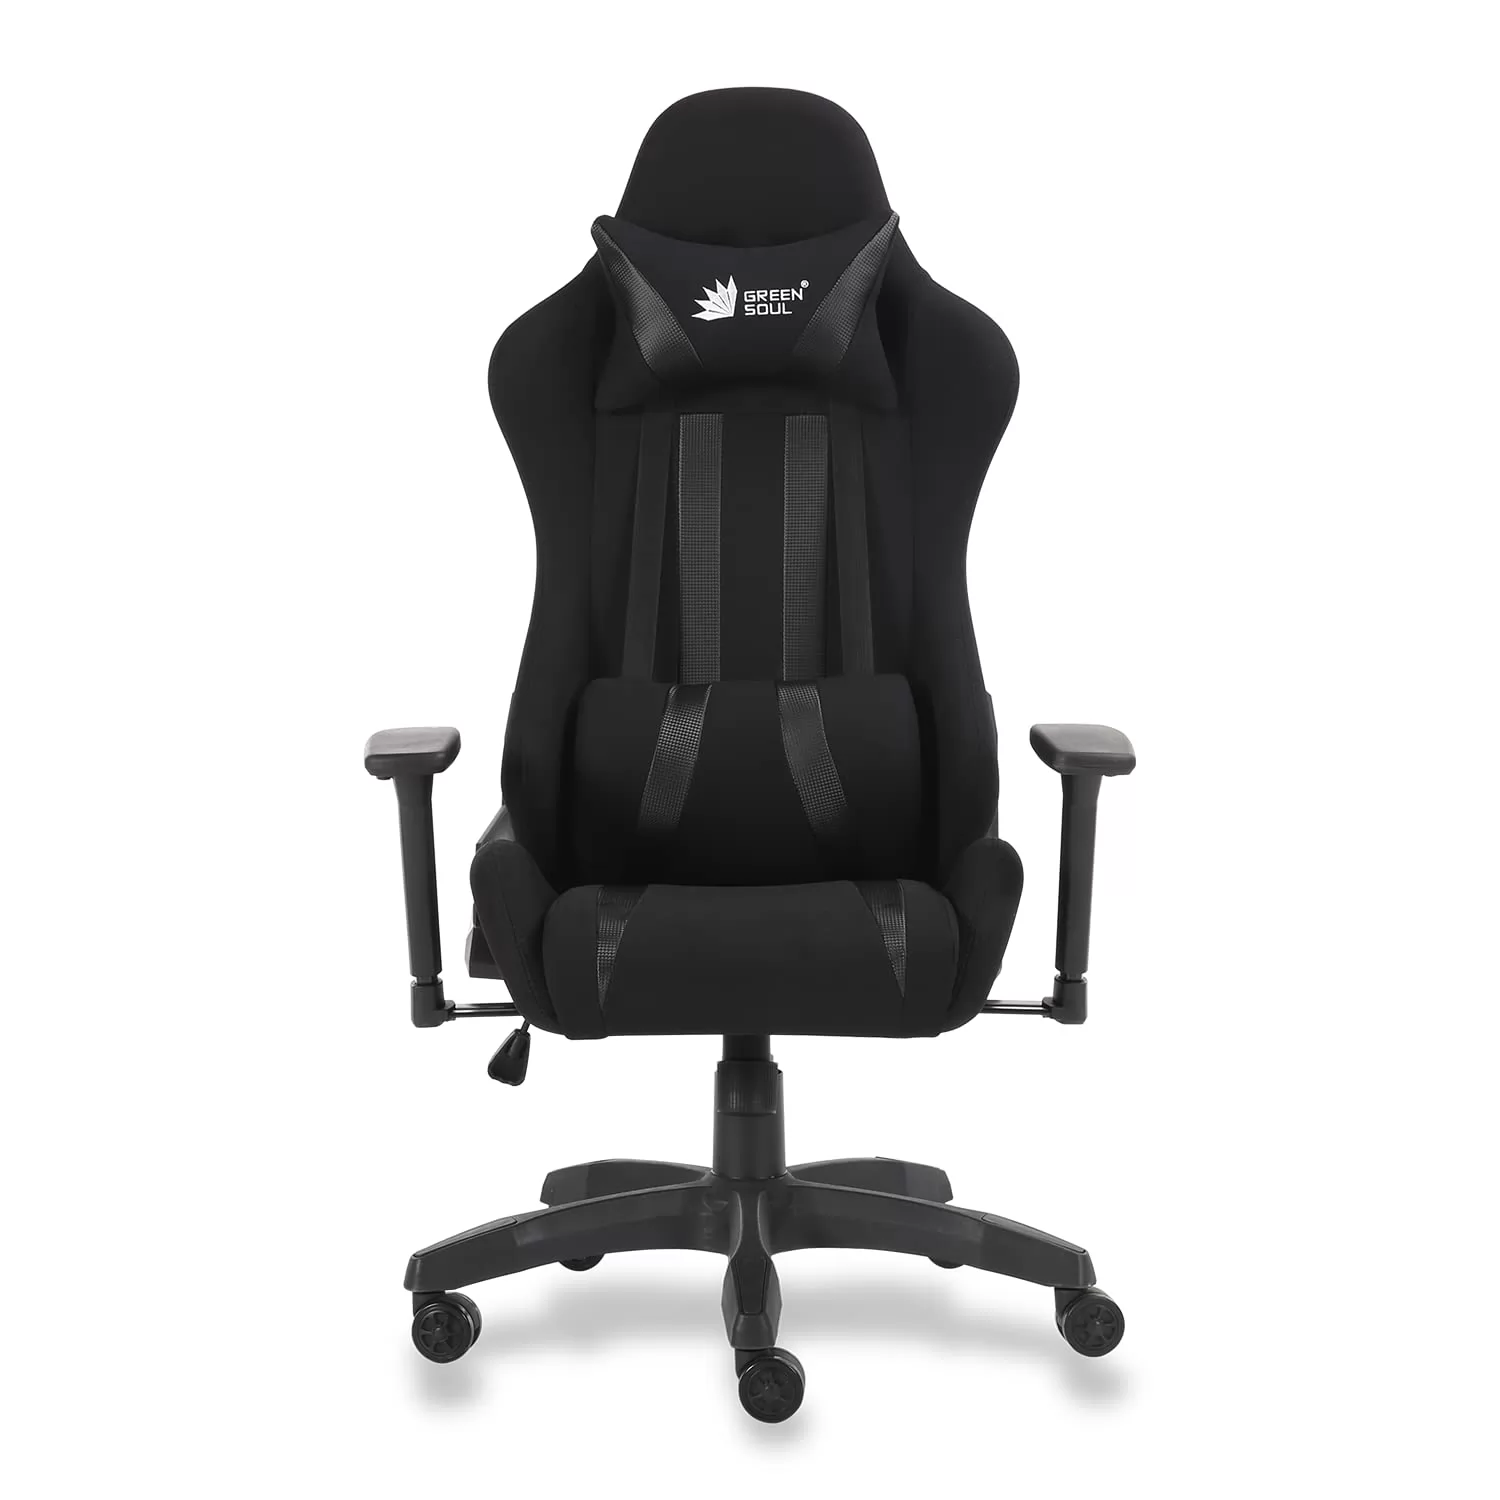 Green Soul Beast Series Fabric and PU Leather Gaming Chair